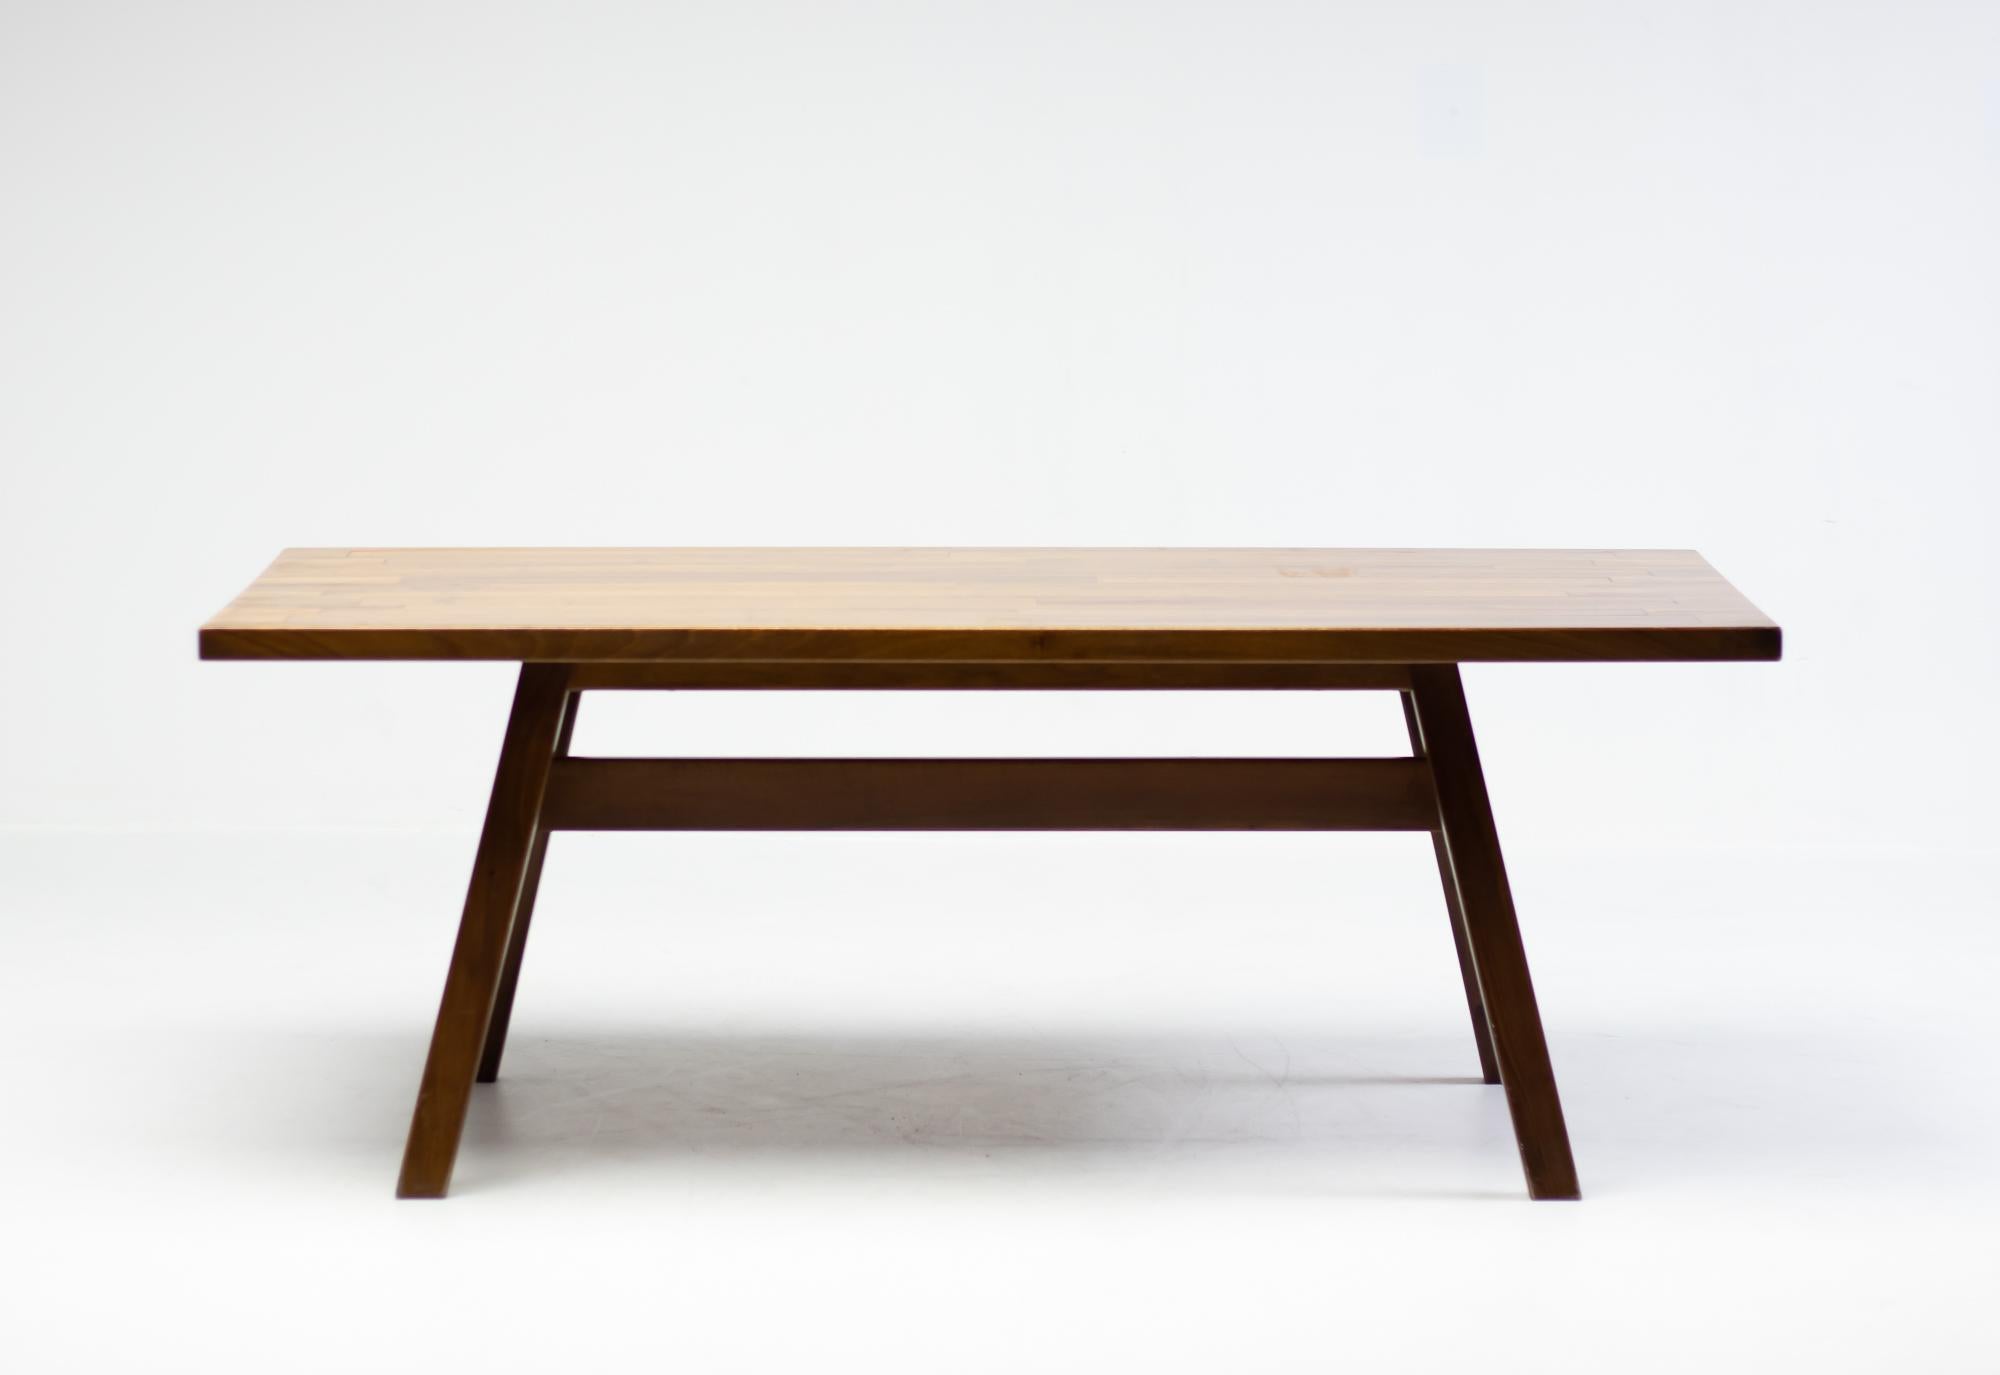 Table from the Torbecchia series, designed by brutalist architect Giovanni Michelucci for Poltronova, 1964. 
Solid walnut structure with beautiful table edge detail similar to Charlotte Perriand tables. 
This architectural piece will enlighten